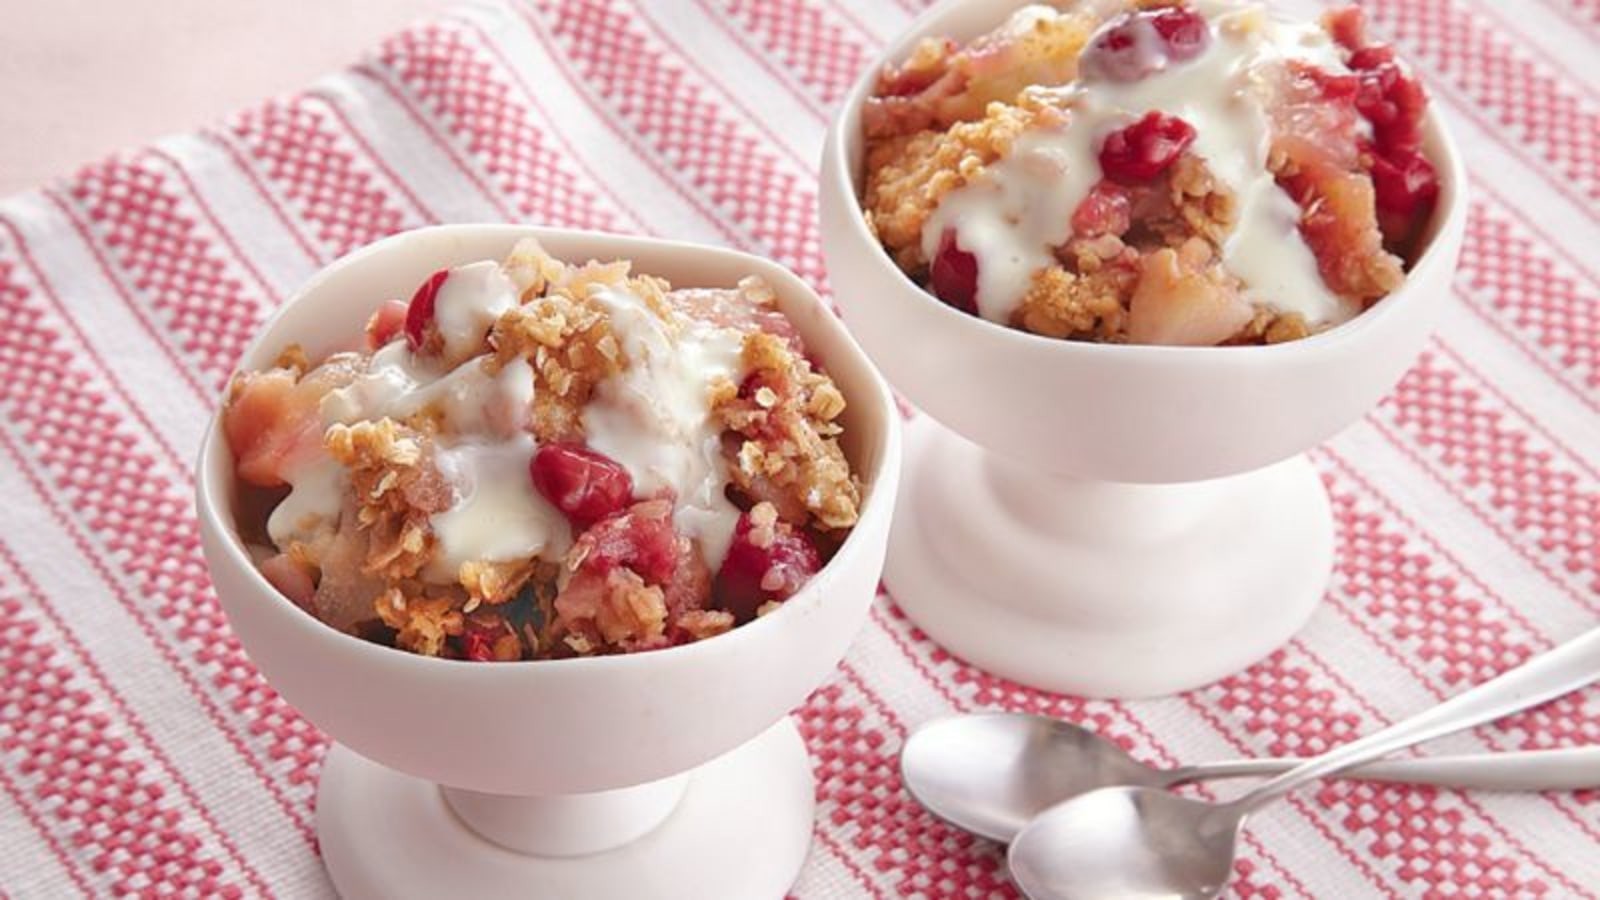 Image of Pear and Cherry Crisp with Almond Custard Sauce